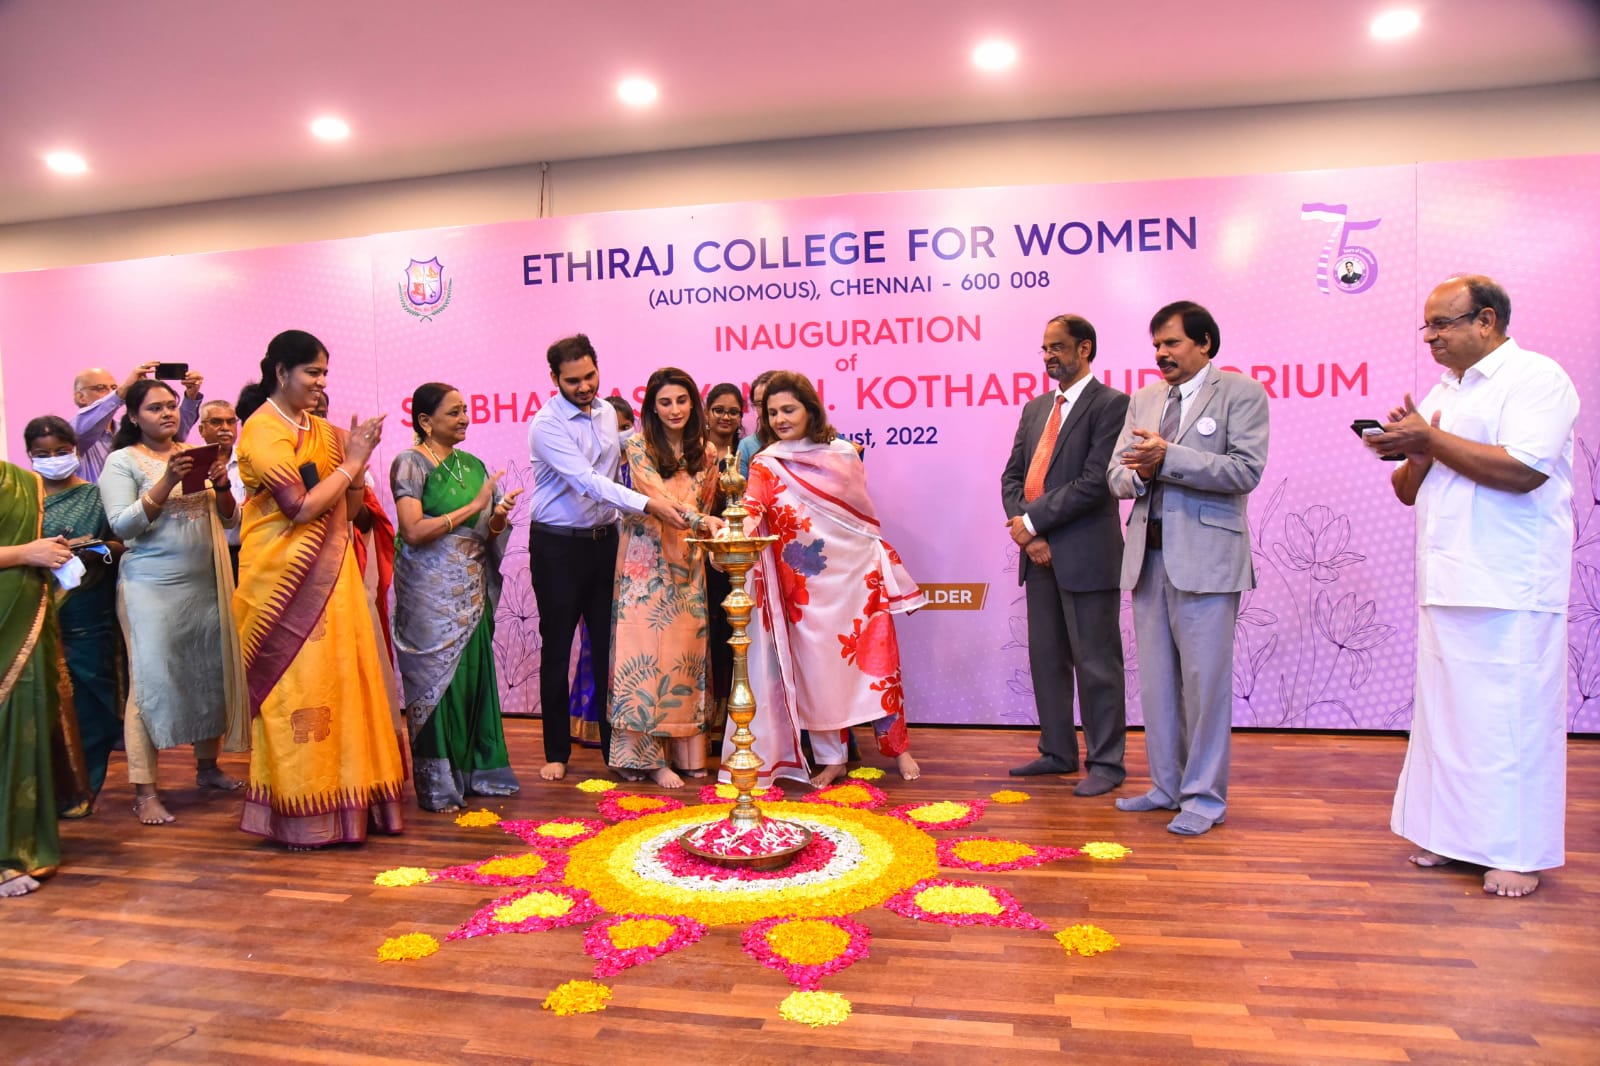 home - Department of Commerce at Ethiraj College for Women